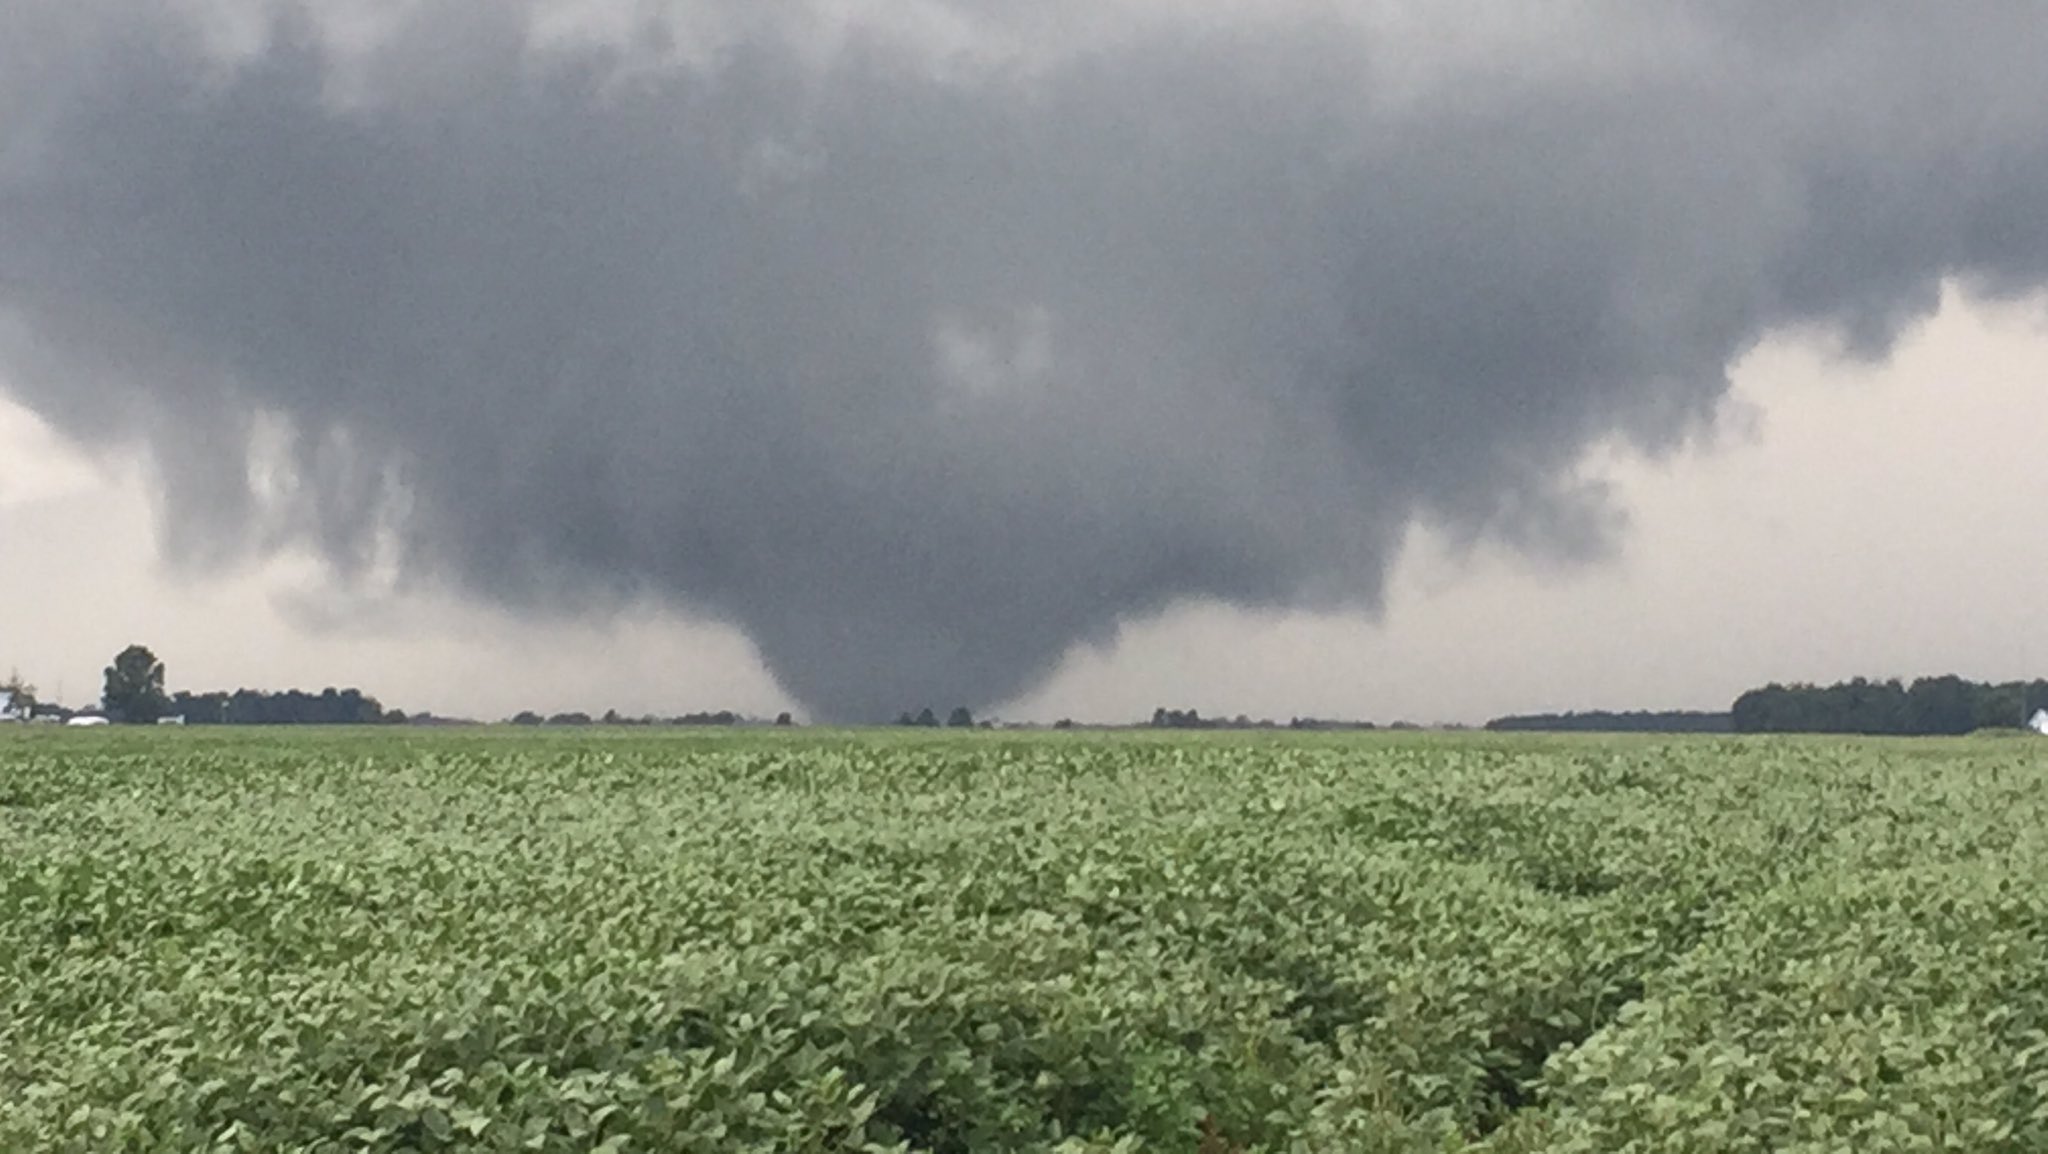 This is how the ‘surprise’ Indiana and Ohio tornado outbreak of August 24, 2016 happened